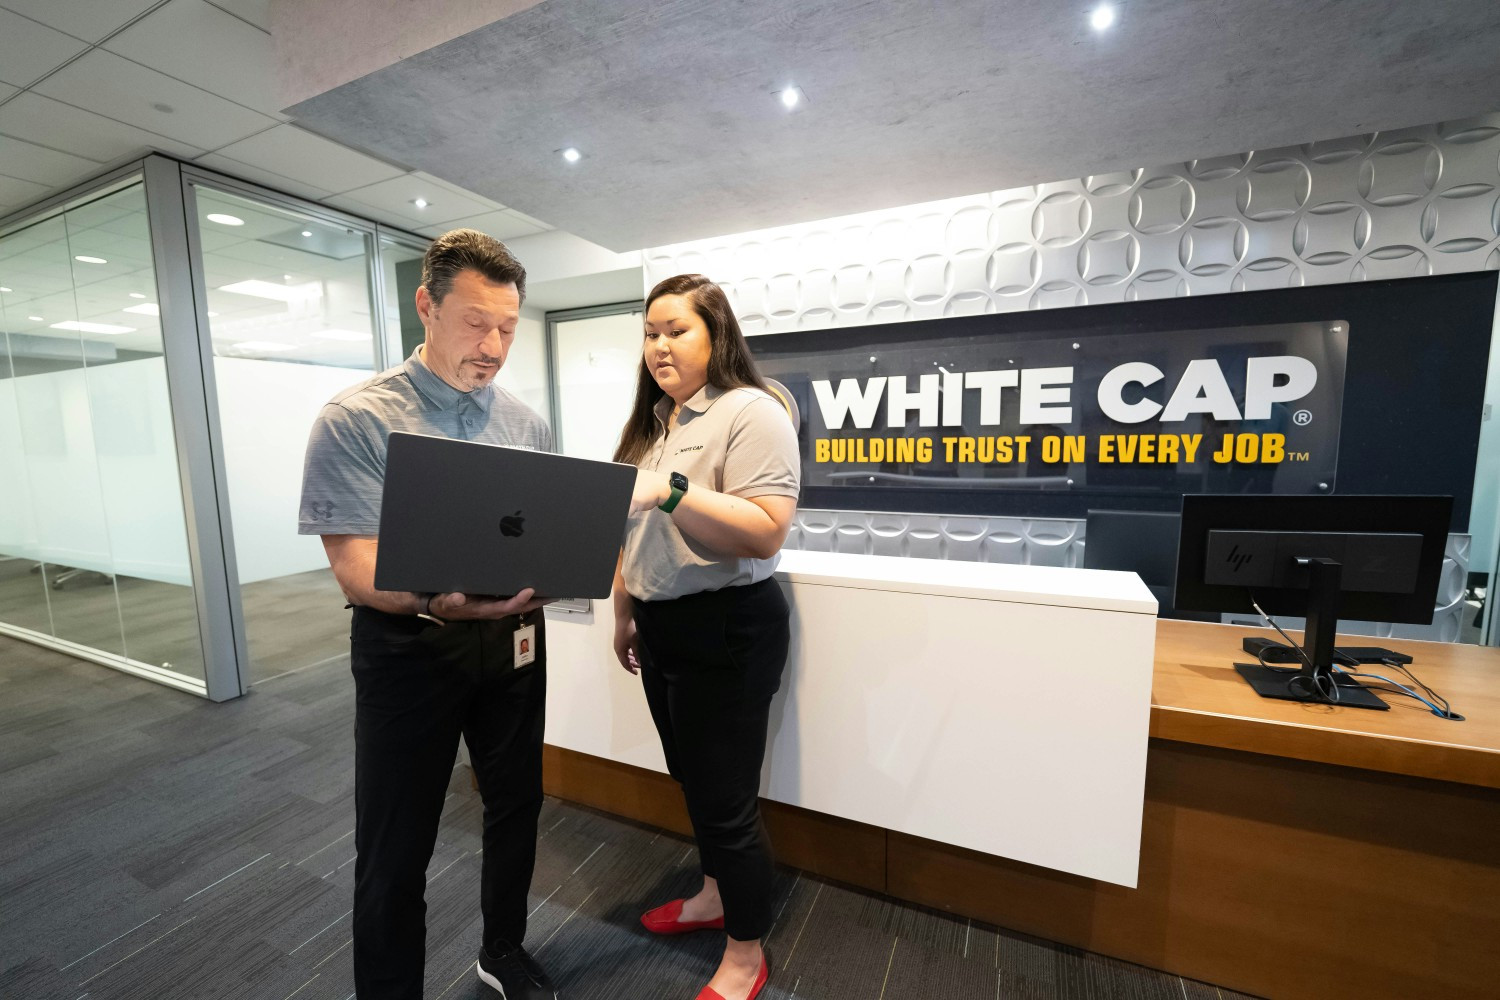 White Cap's corporate HQ is called the Field Support Center as we focus on working as One Team.